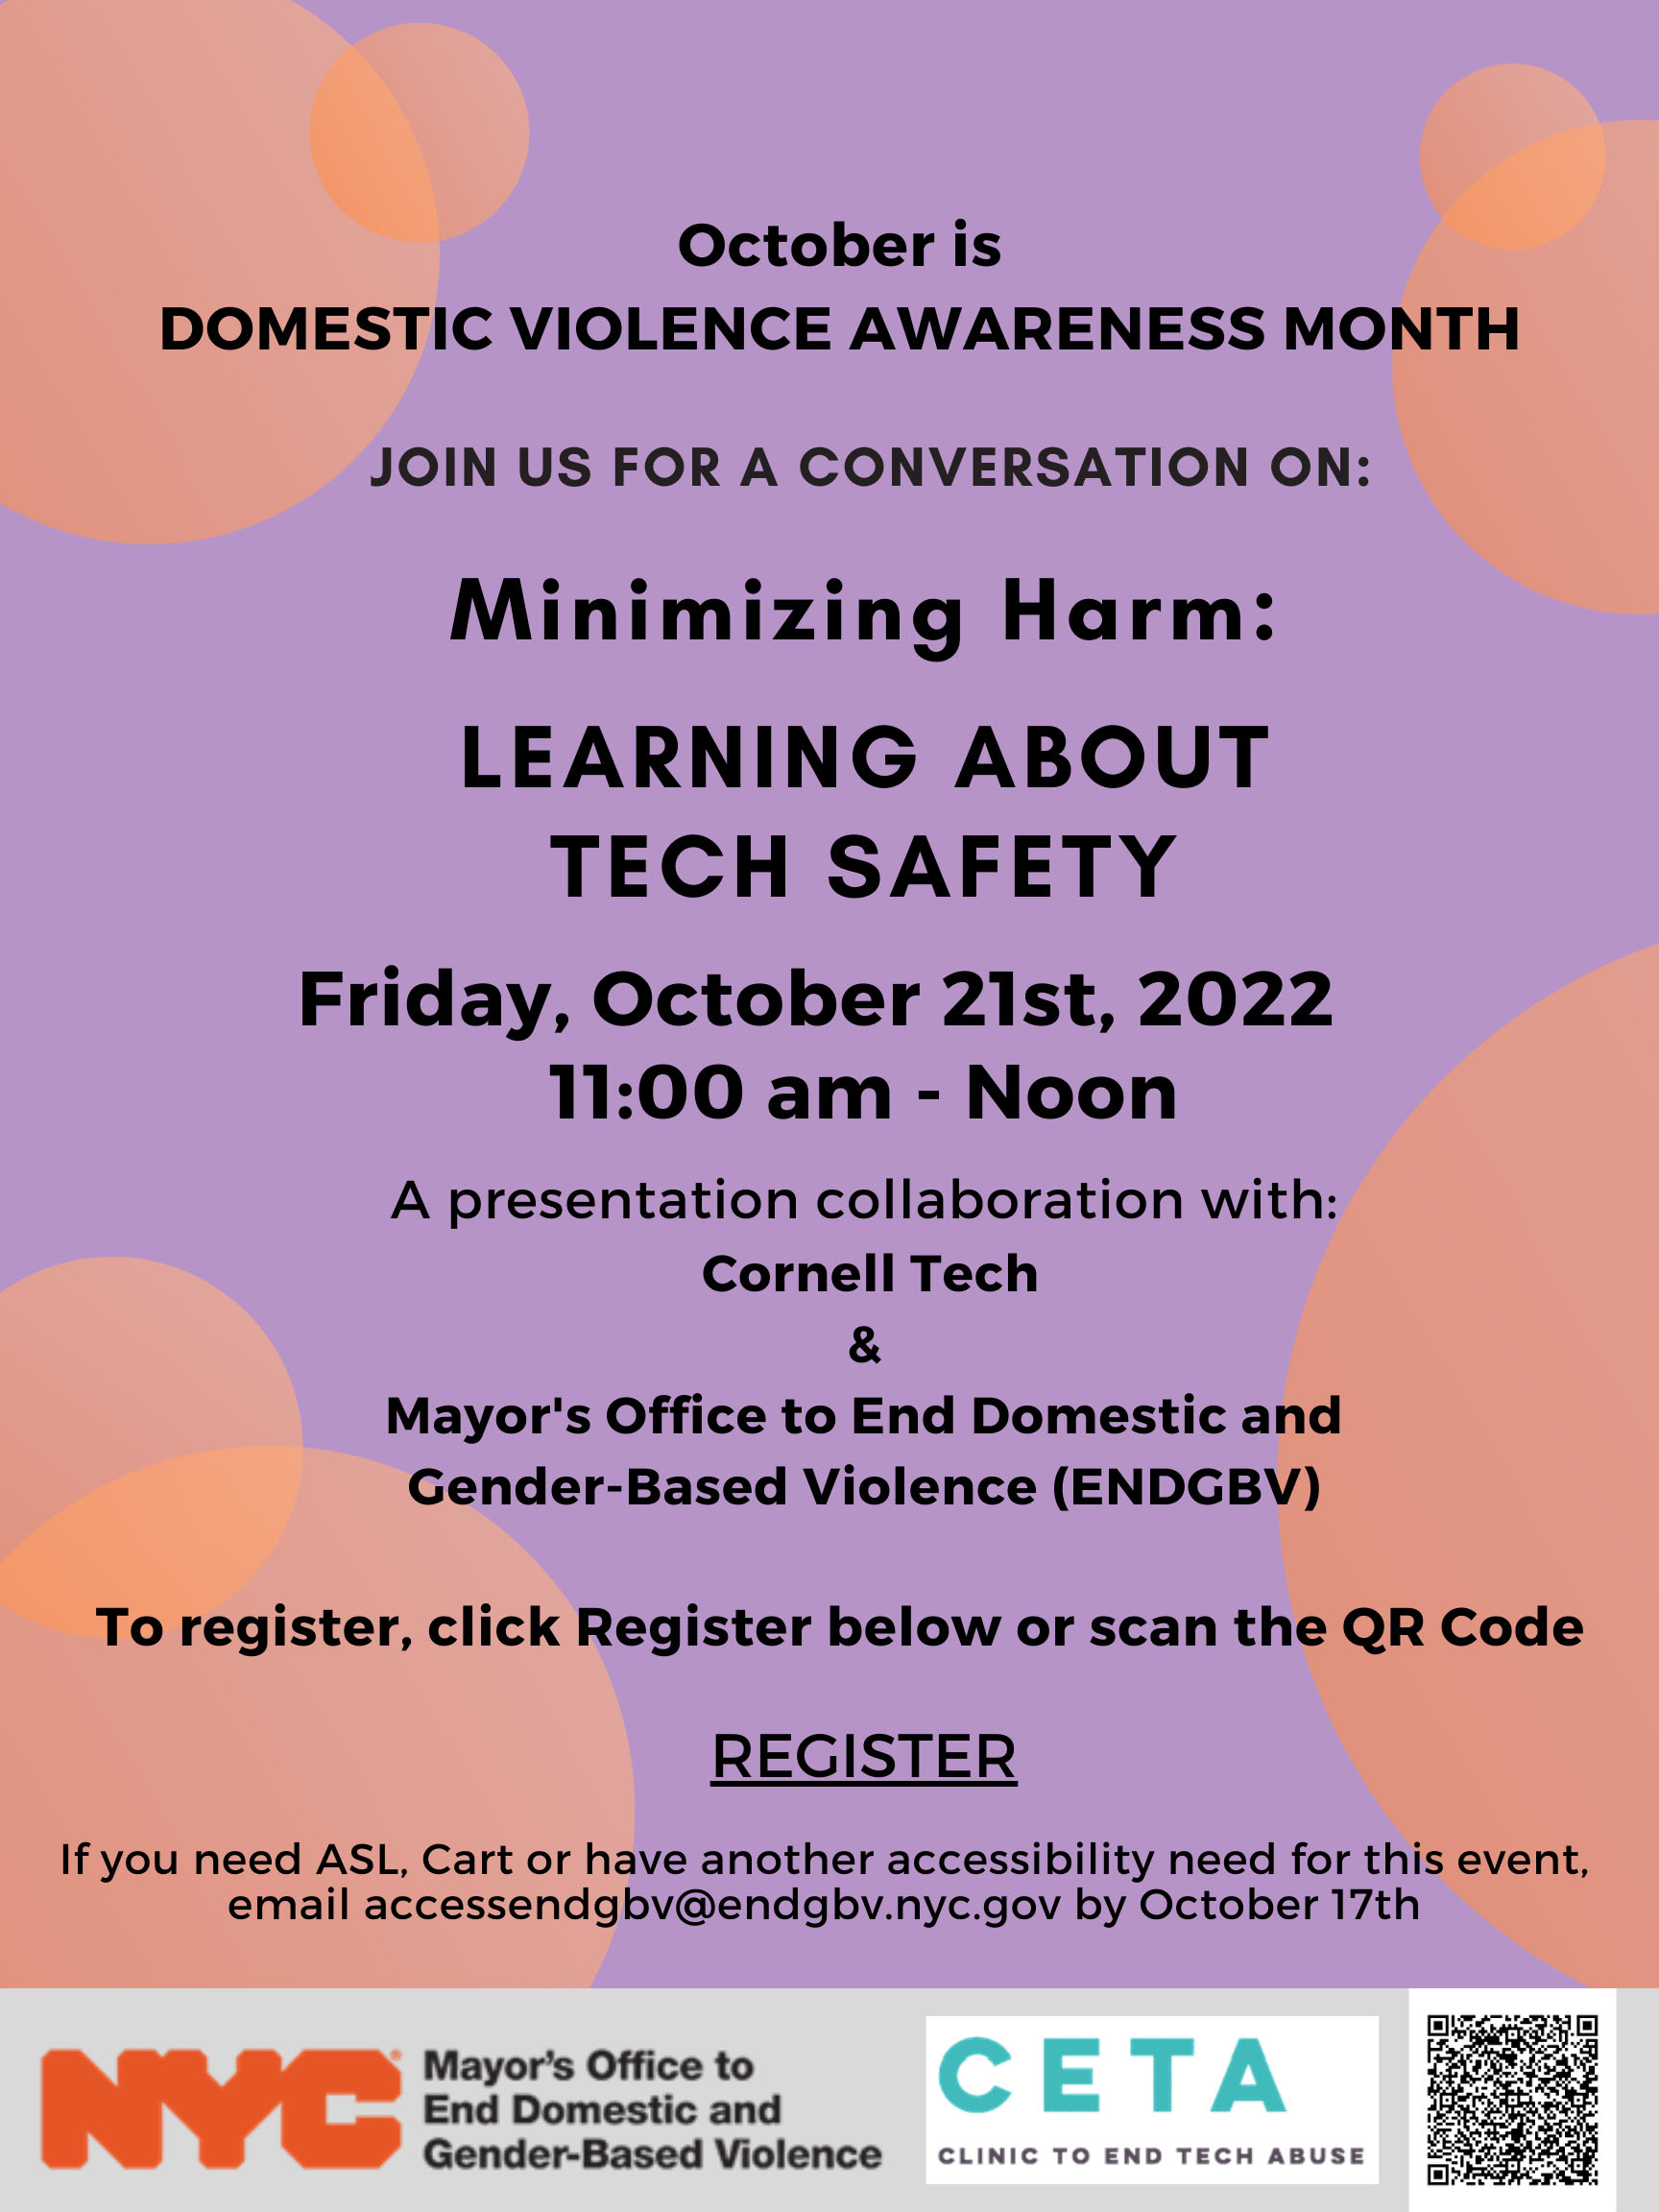 Orange circles on purple in square background with text: : October is Domestic Violence Awareness Month Cornell Tech and ENDGBV hosting a VIRTUAL TRAINING on Minimizing Harm: Learning About Tech Safety on October 21, 2022 at 11:00 am